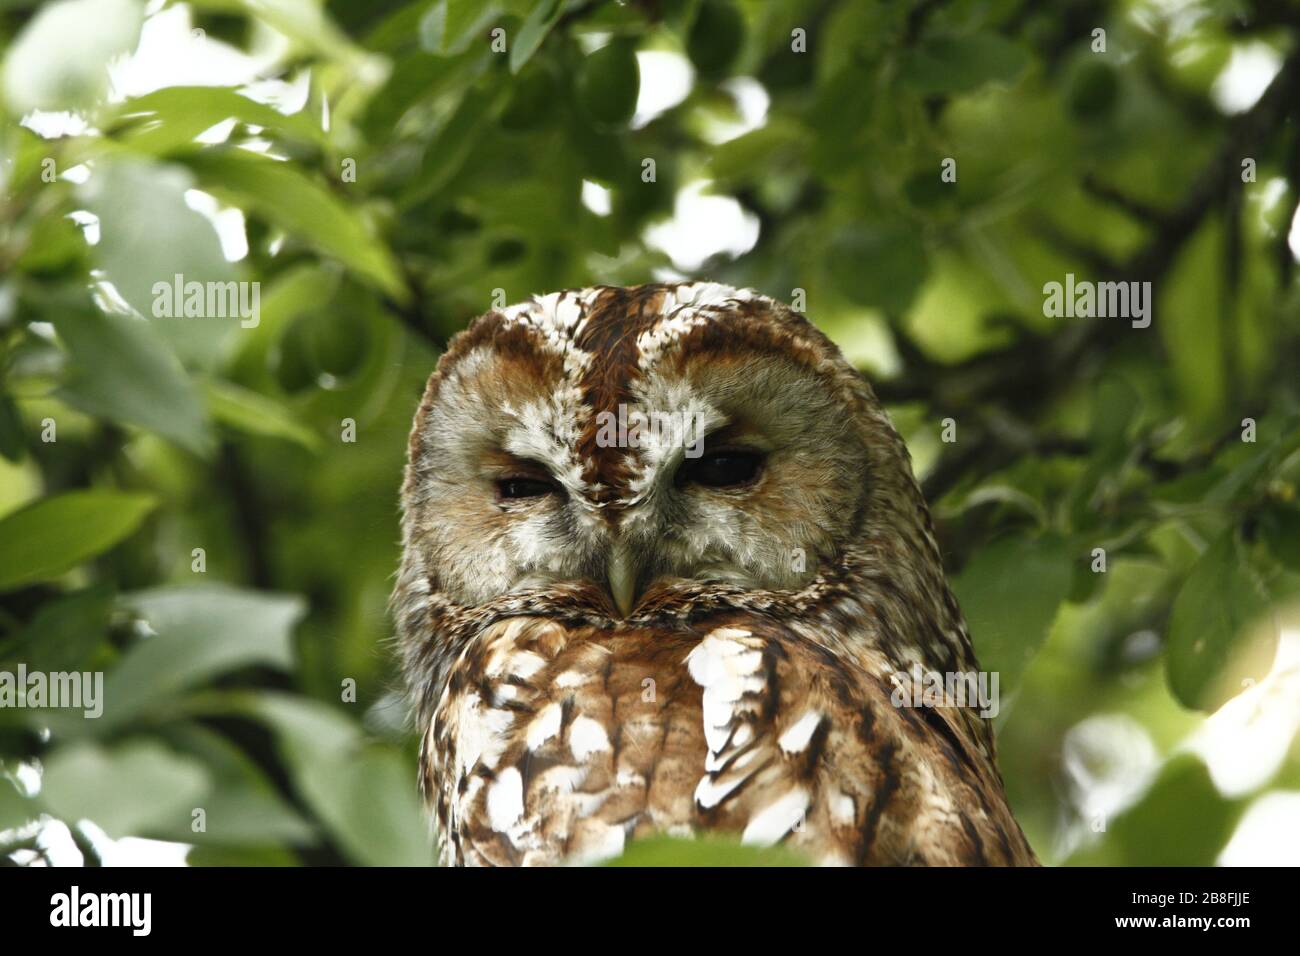 A picture of one of the most common owls, the Tawny Owl, sitting in a tree. Stock Photo